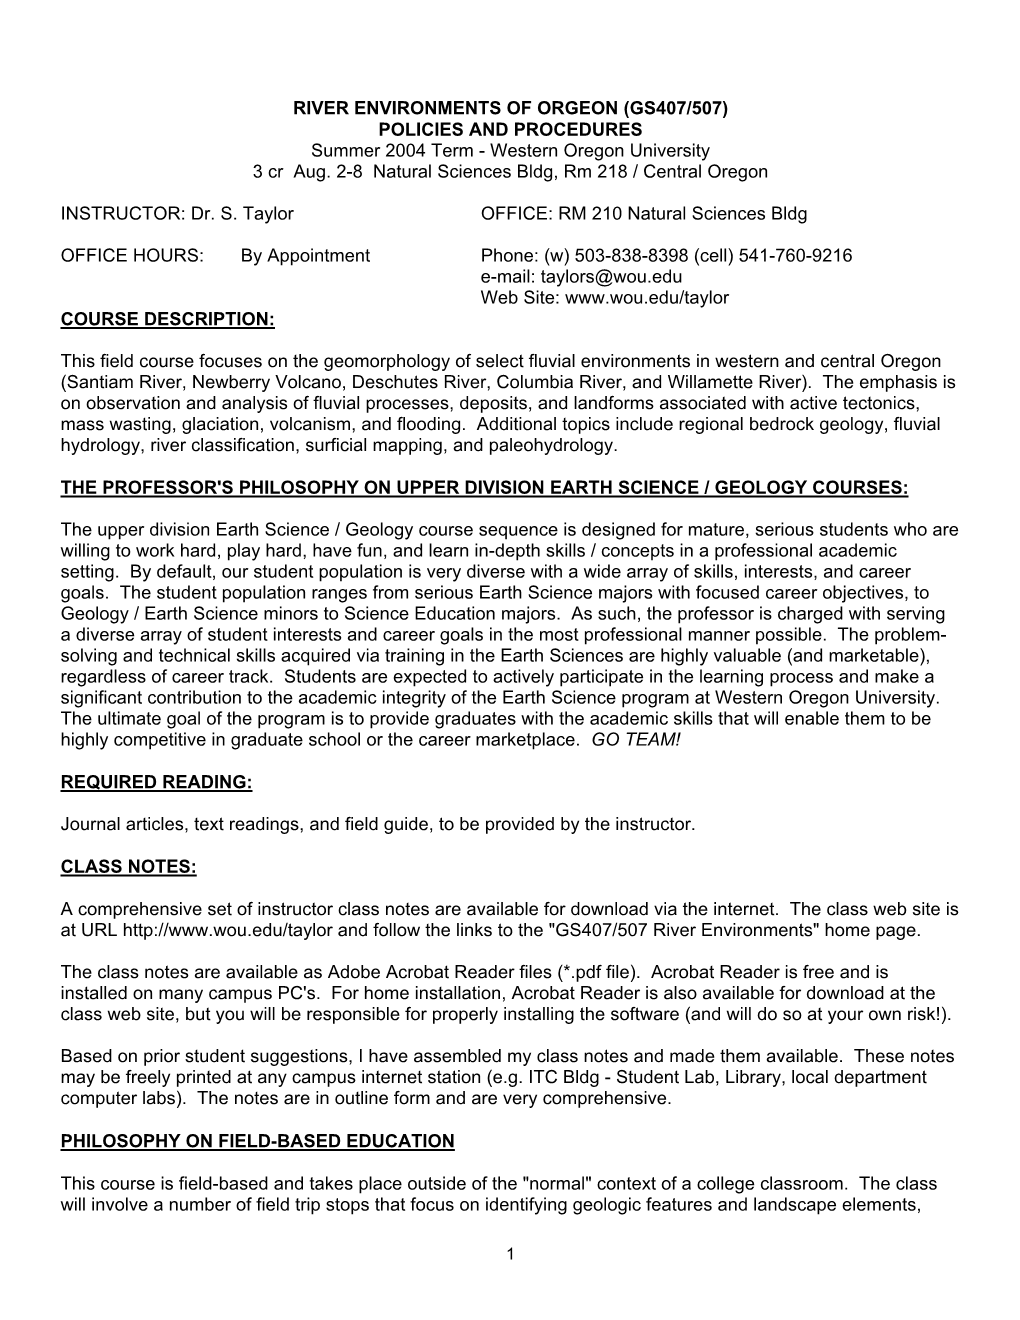 RIVER ENVIRONMENTS of ORGEON (GS407/507) POLICIES and PROCEDURES Summer 2004 Term - Western Oregon University 3 Cr Aug